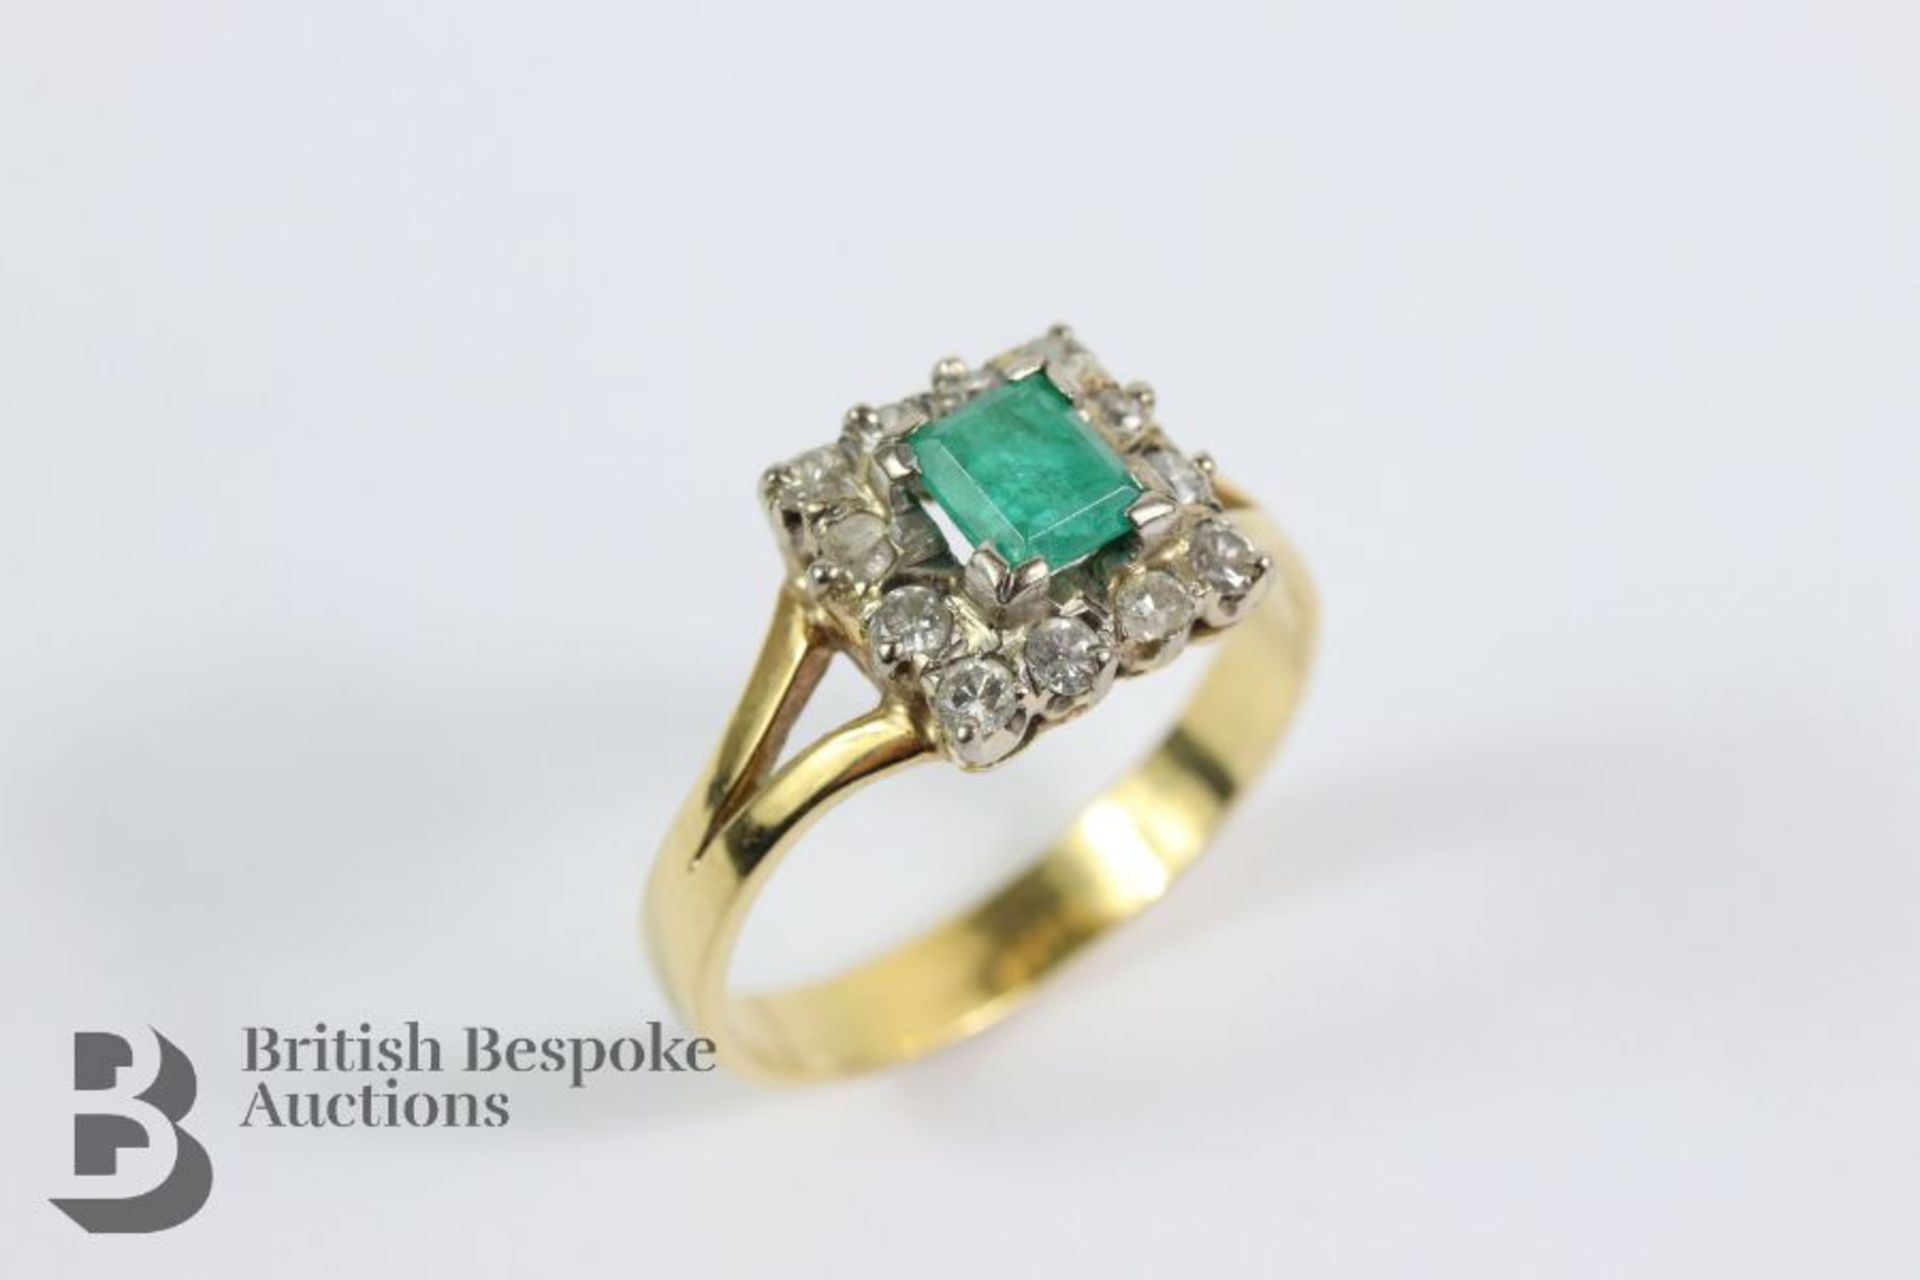 Emerald and Diamond Ring - Image 3 of 3